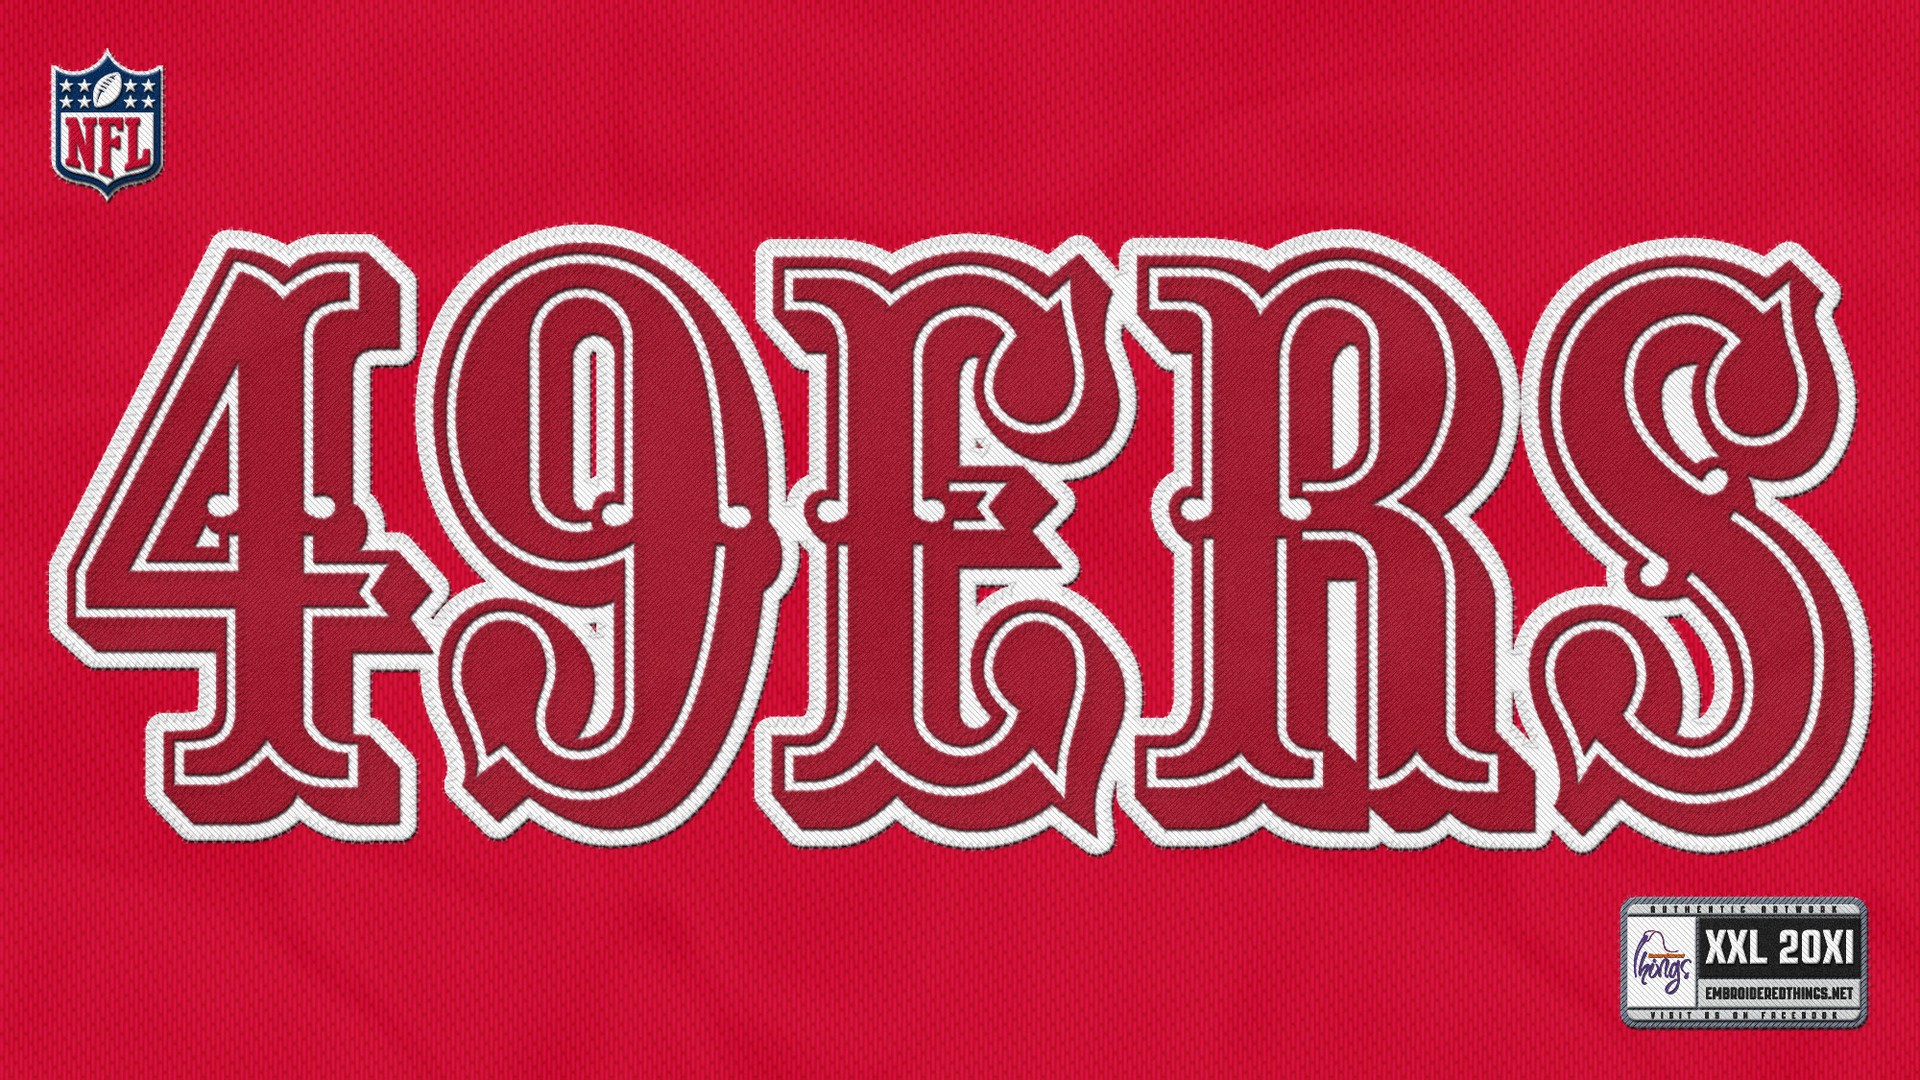 49ers screen background